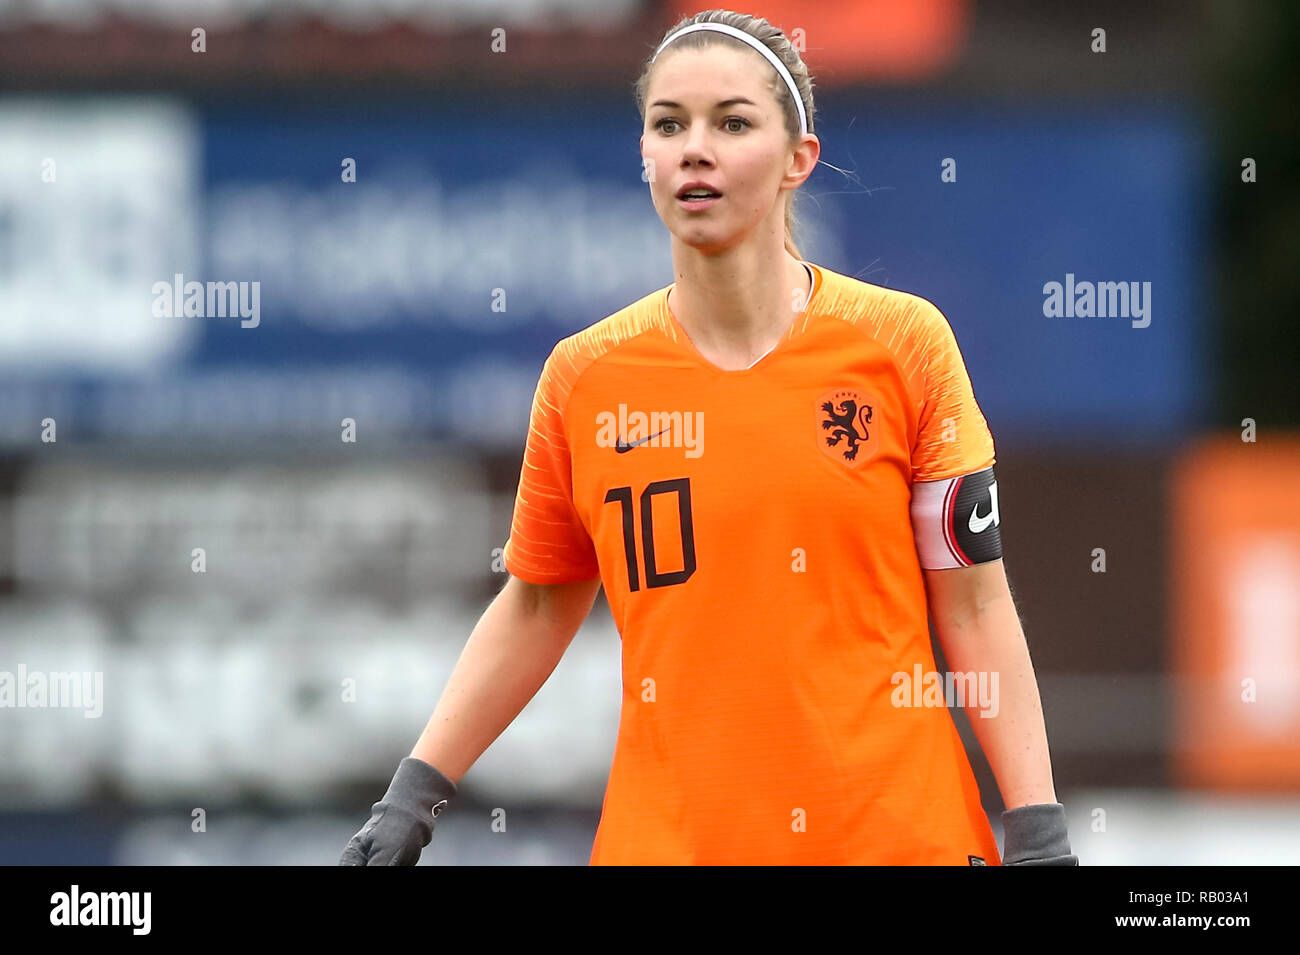 Anouk Hoogendijk High Resolution Stock Photography and Images - Alamy